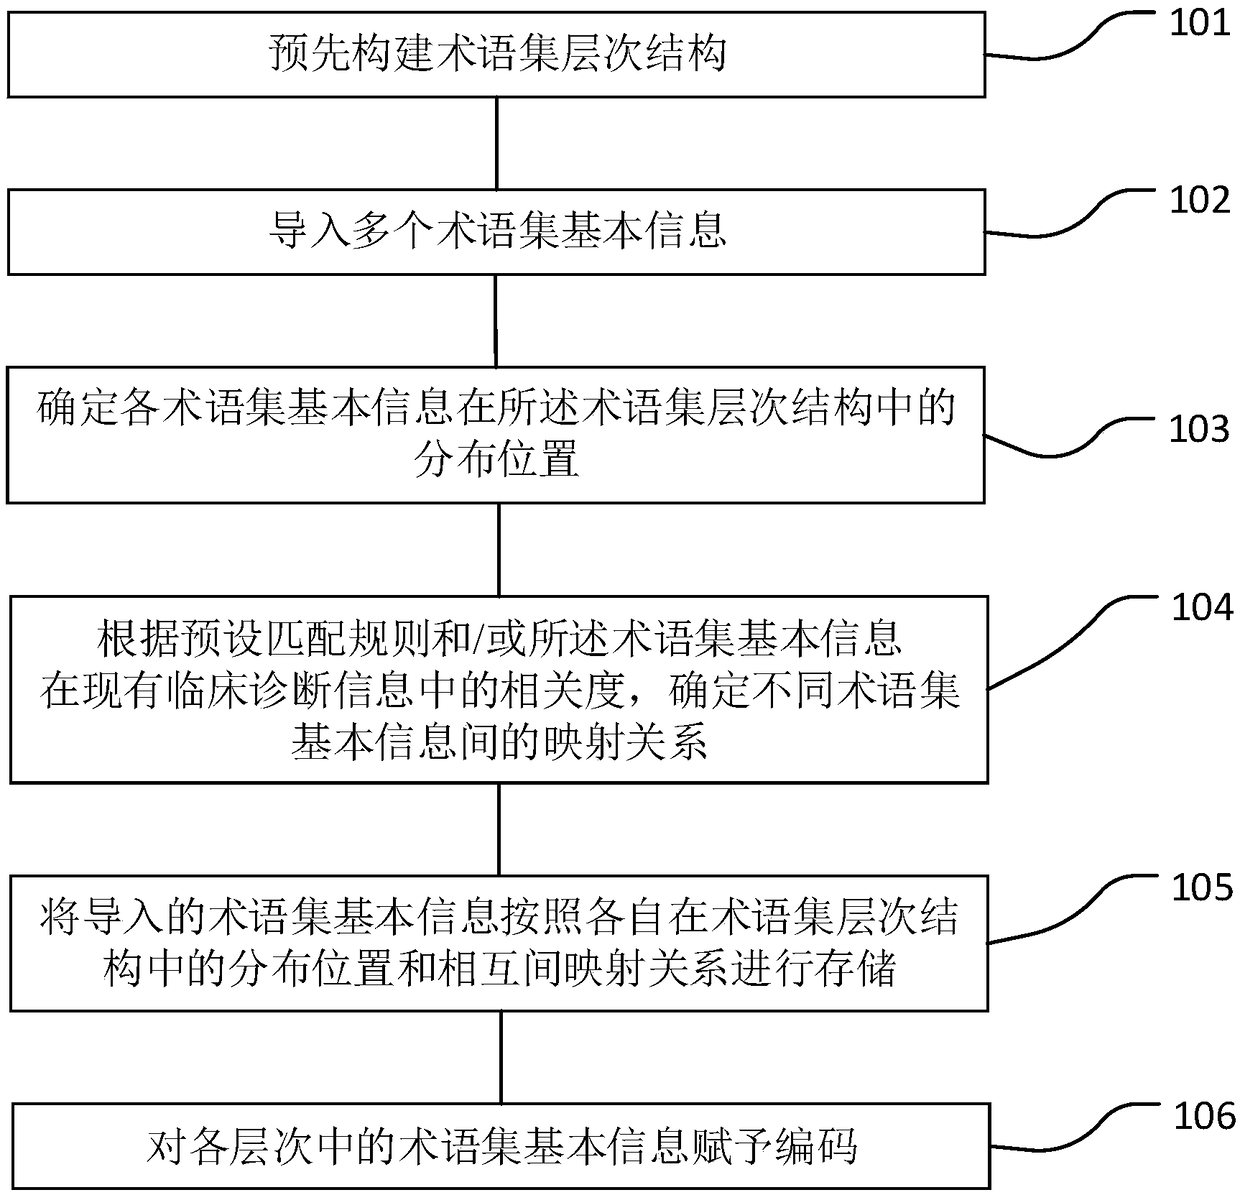 Structured clinical diagnosis term set construction method and system